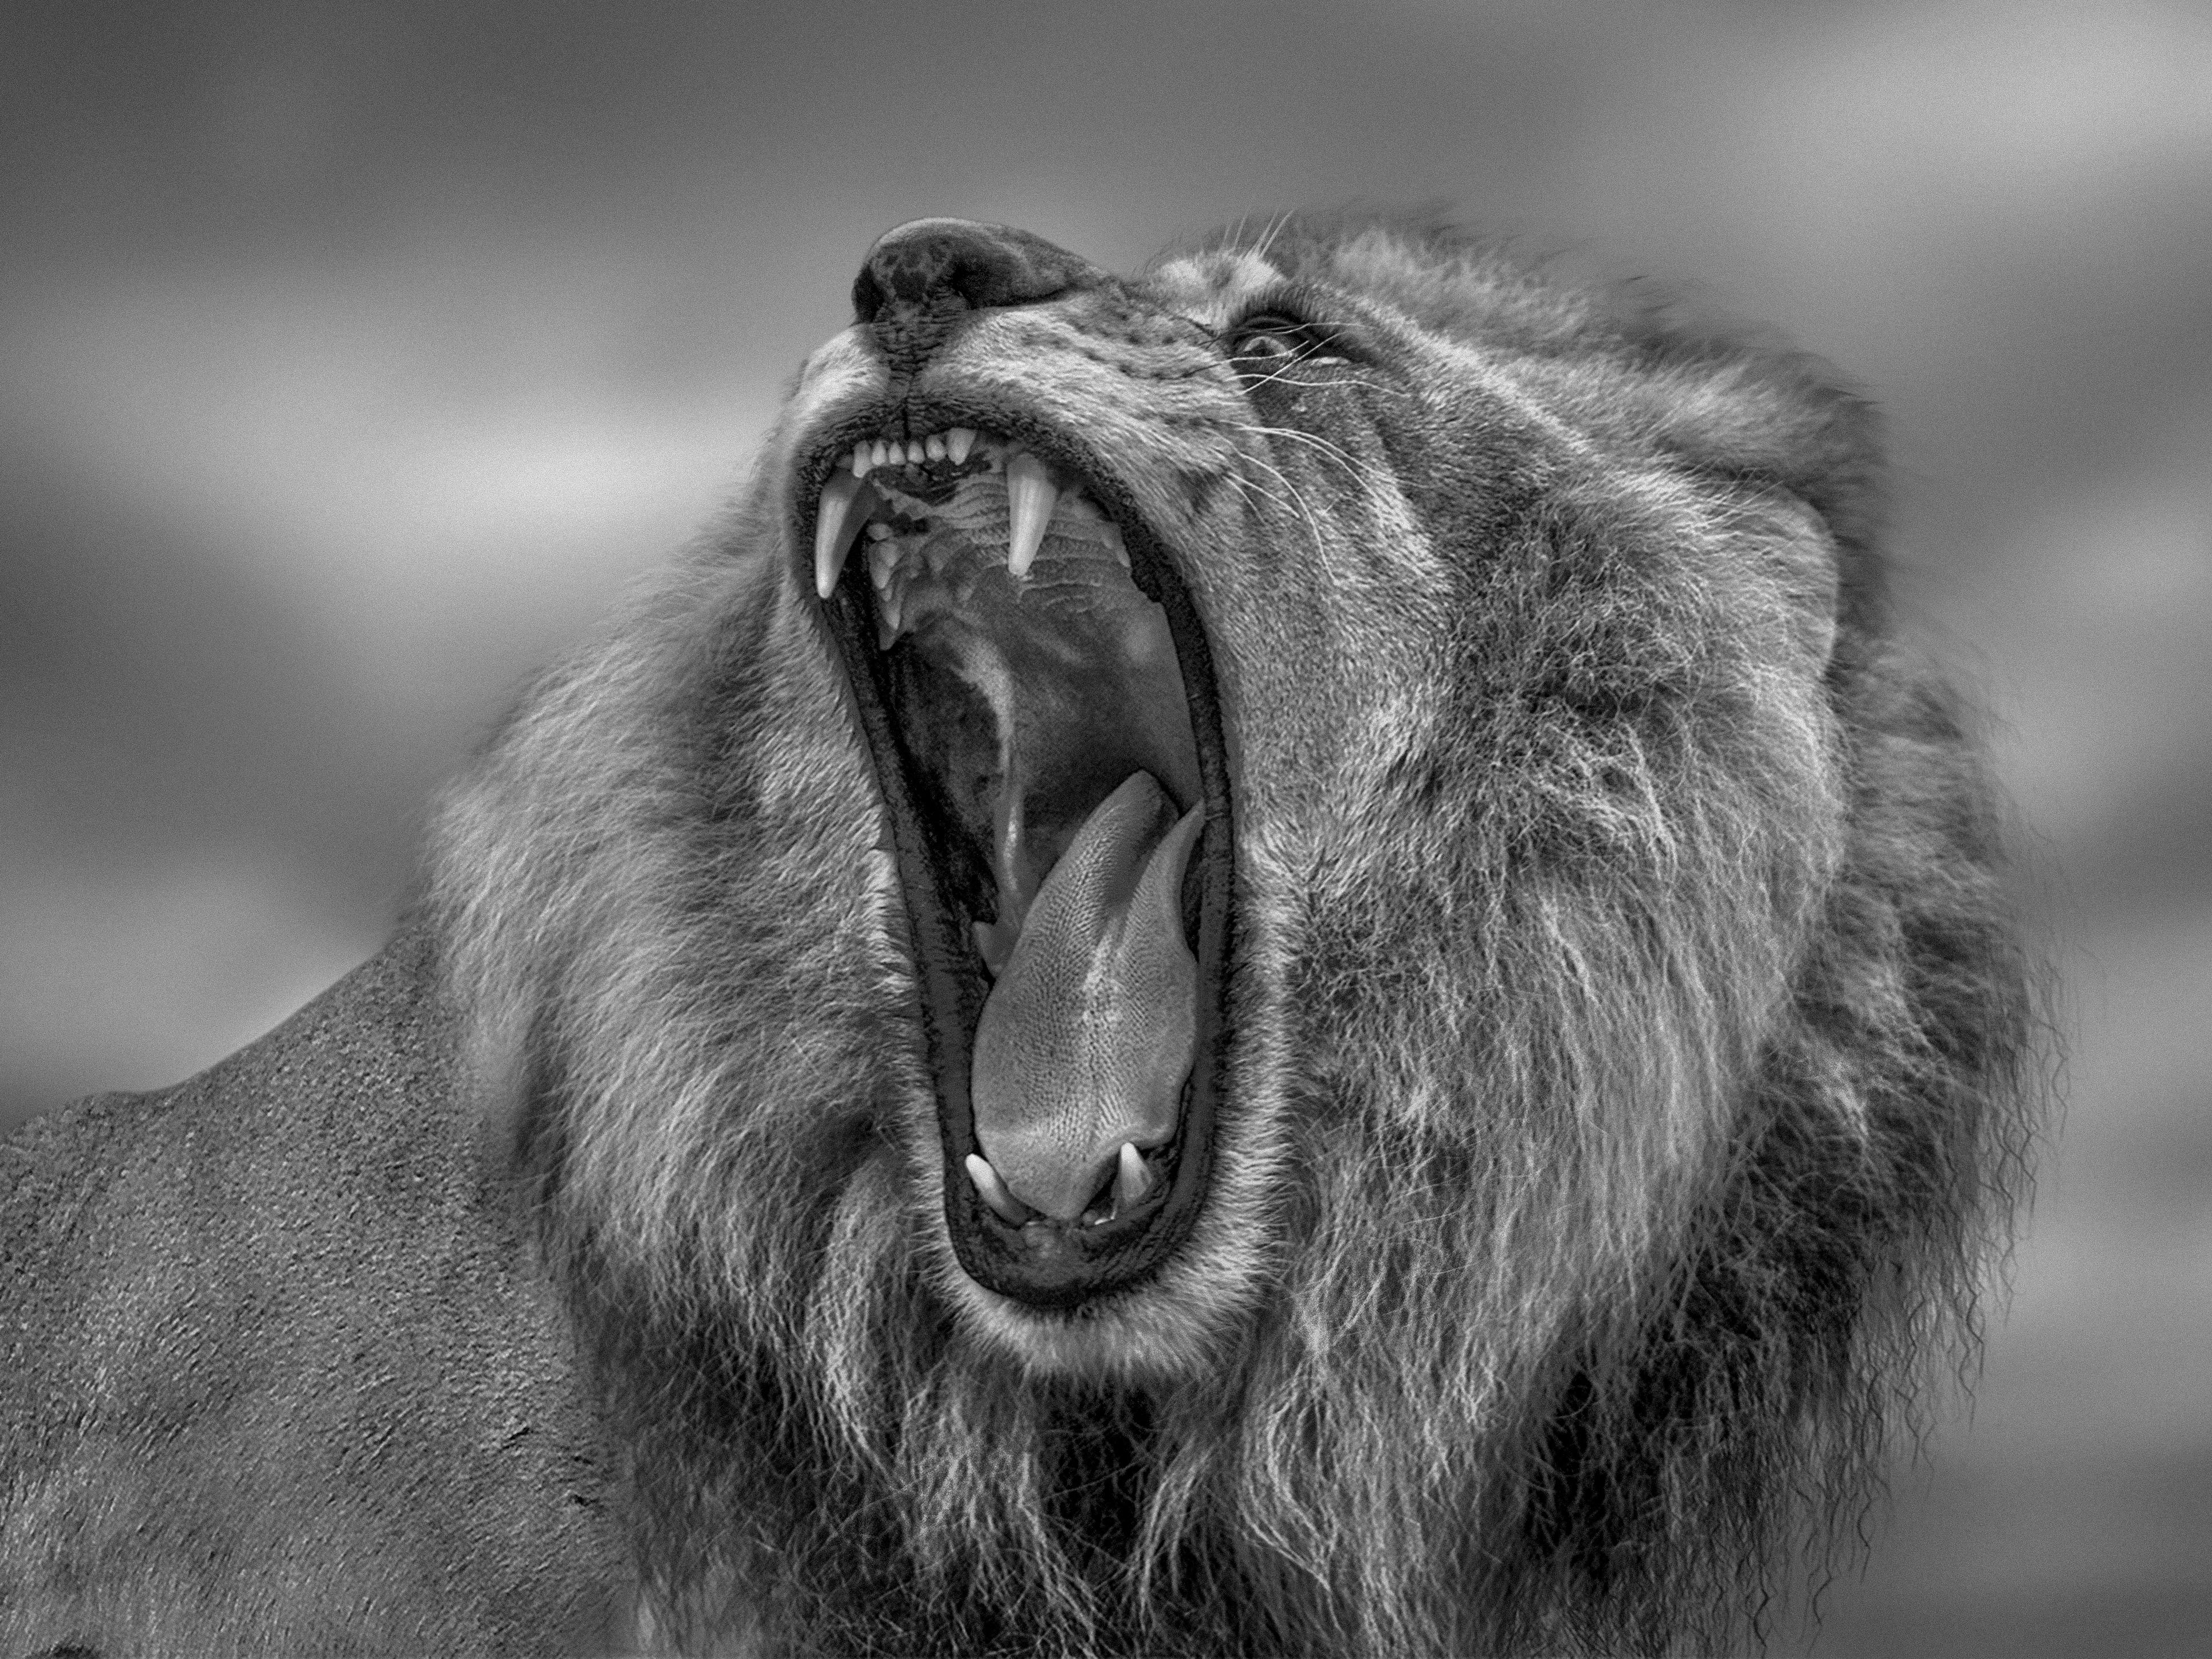 Shane Russeck Animal Print - "Roar" - 40x60 Black and White Lion Photography , Africa, Lion Photograph